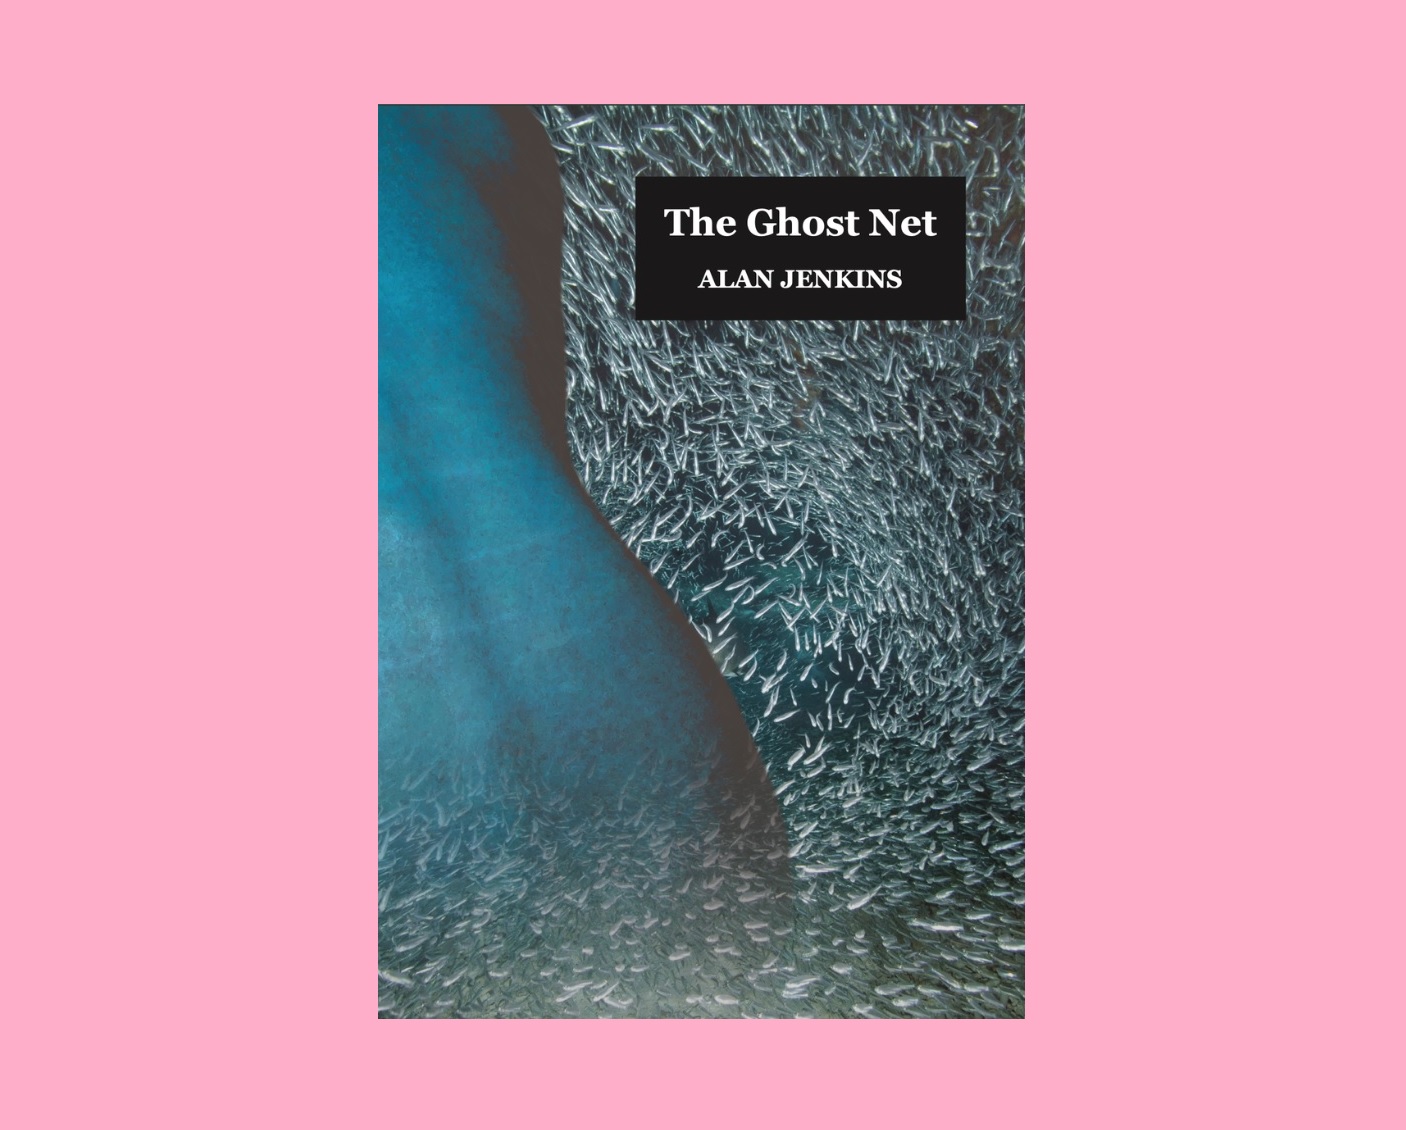 A Romantic two centuries late: ‘The Ghost Net’ by Alan Jenkins